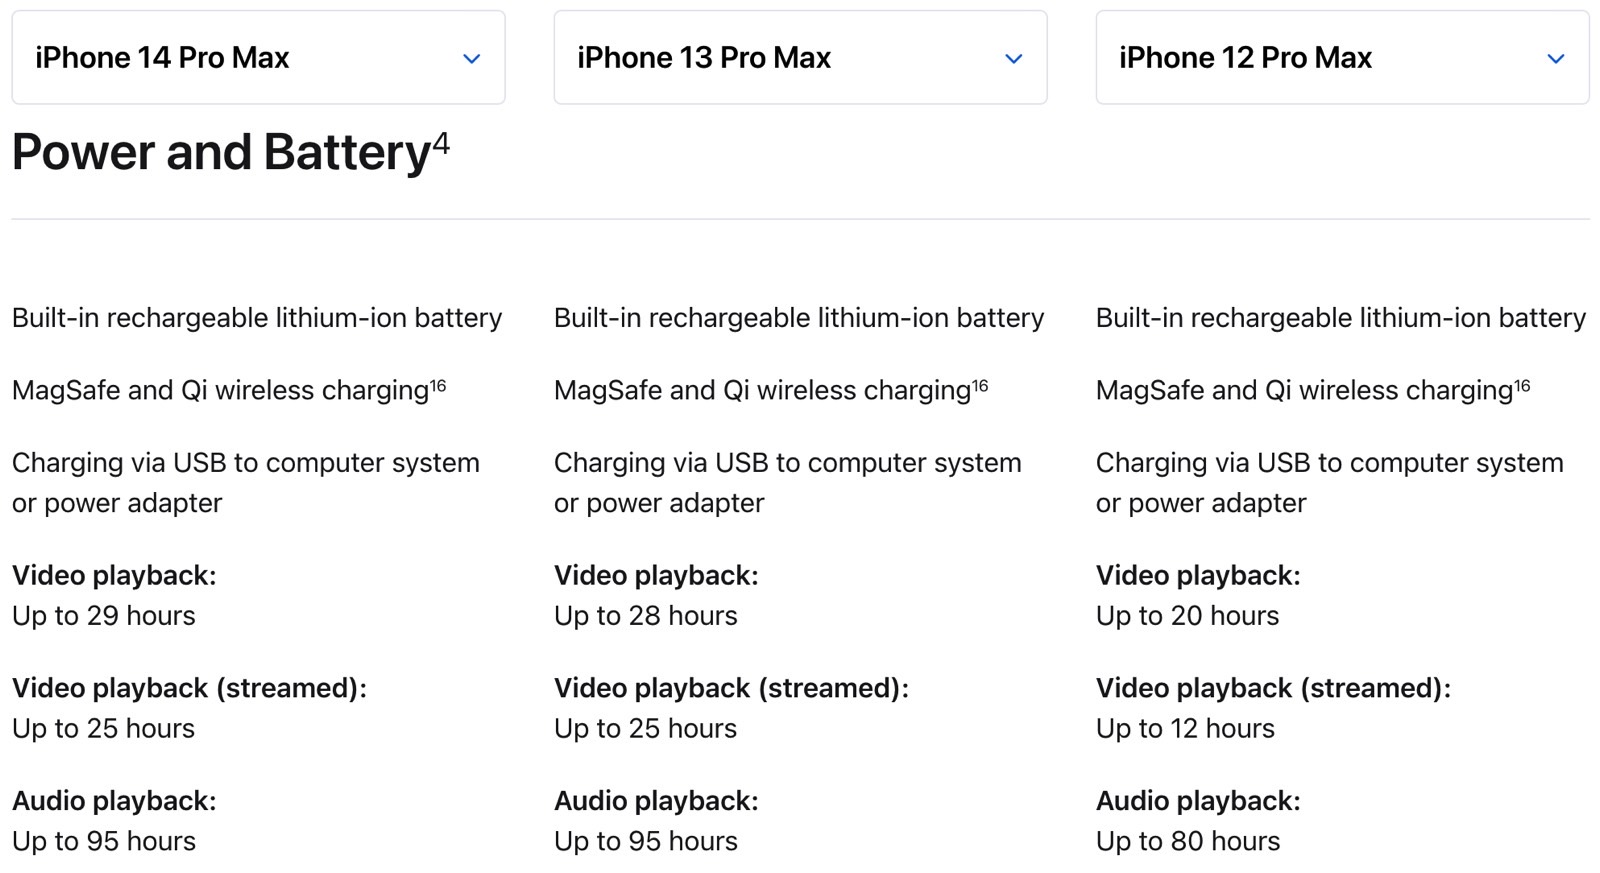 iPhone 14 Pro Max battery life compared to iPhone 13 Pro Max and iPhone 12 Pro Max.